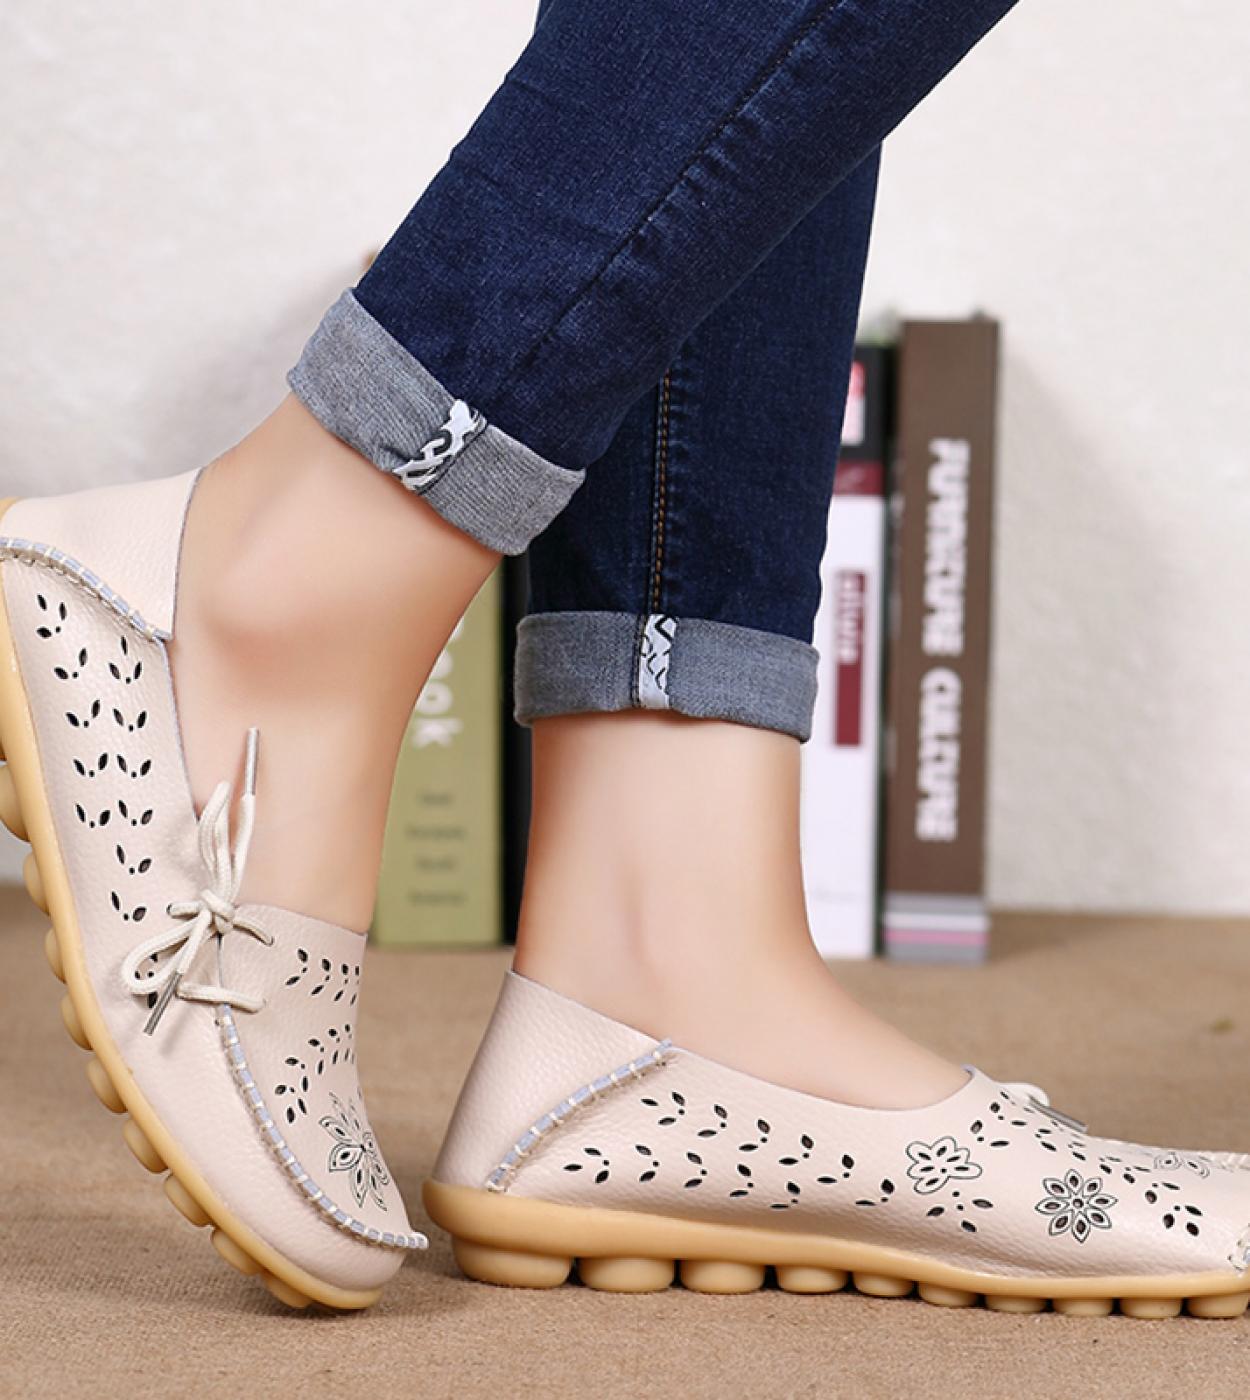 Comemore Female Ballet Flats Women Genuine Leather Breathbale Moccasin  Women Shallow Shoes Solid Ballerina Ladies Autum